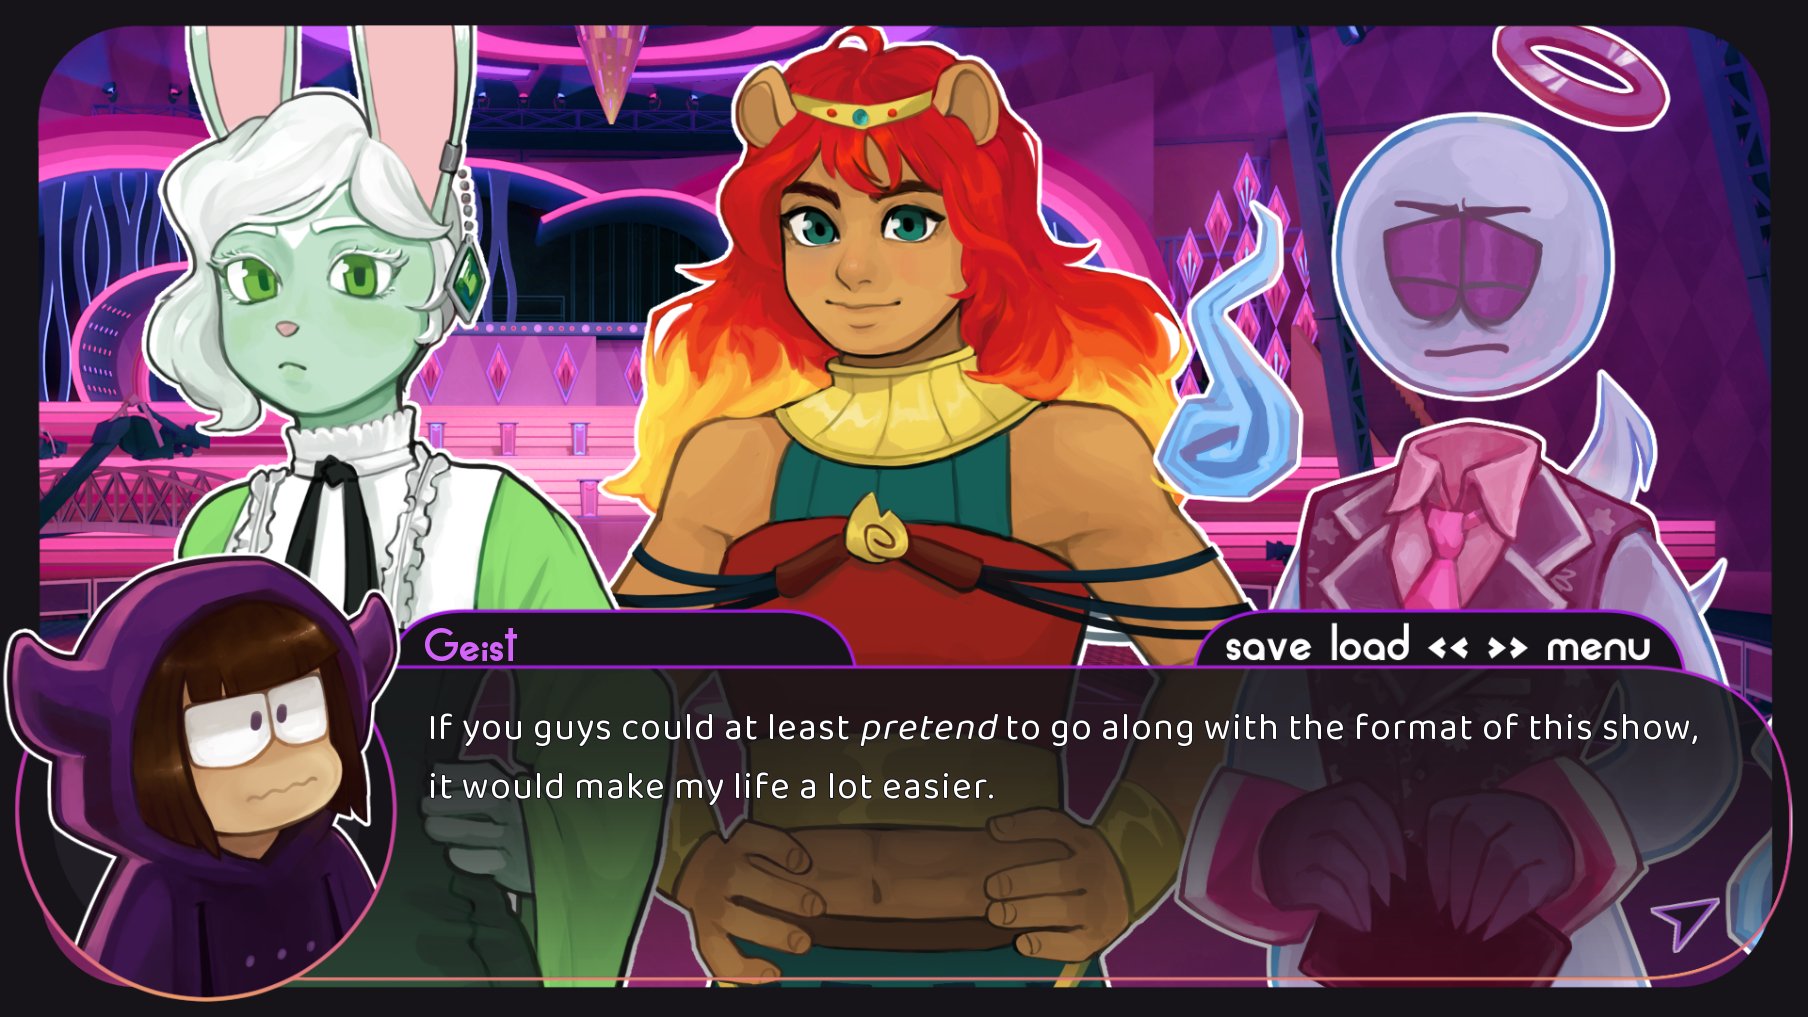 a screenshot from a visual novel game, with a background of a purple and pink stage set; the main character is talking to the host as well as a large lion woman and a haughty green-colored bunny lady. The host, Geist, is saying "If you guys would at least pretend to go along with the format of this show, it would make my life a lot easier."